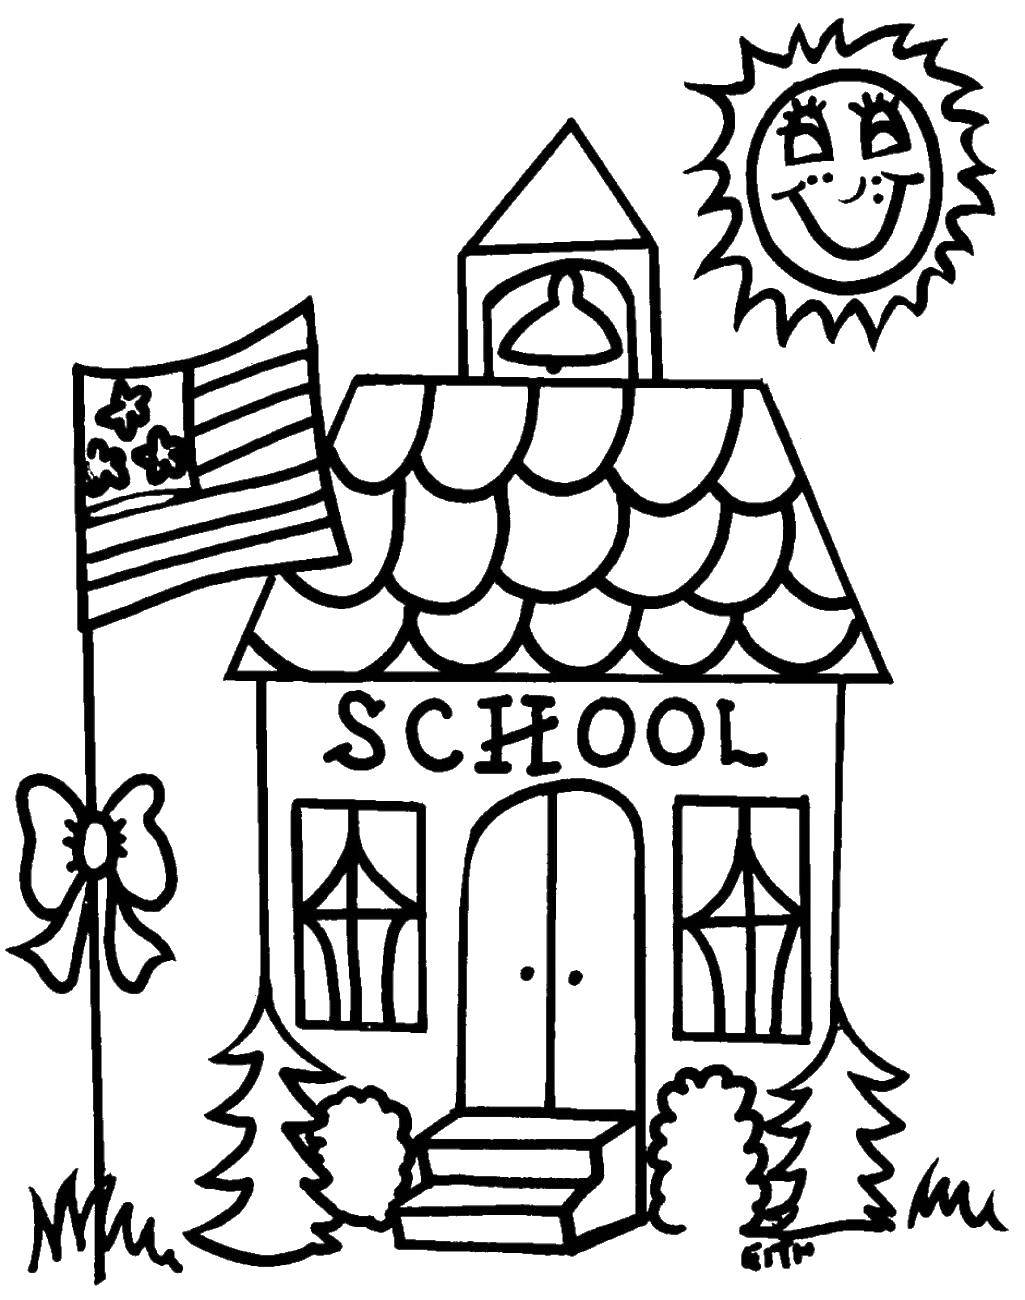 Coloring The building of the school. Category School supplies. Tags:  school, children.